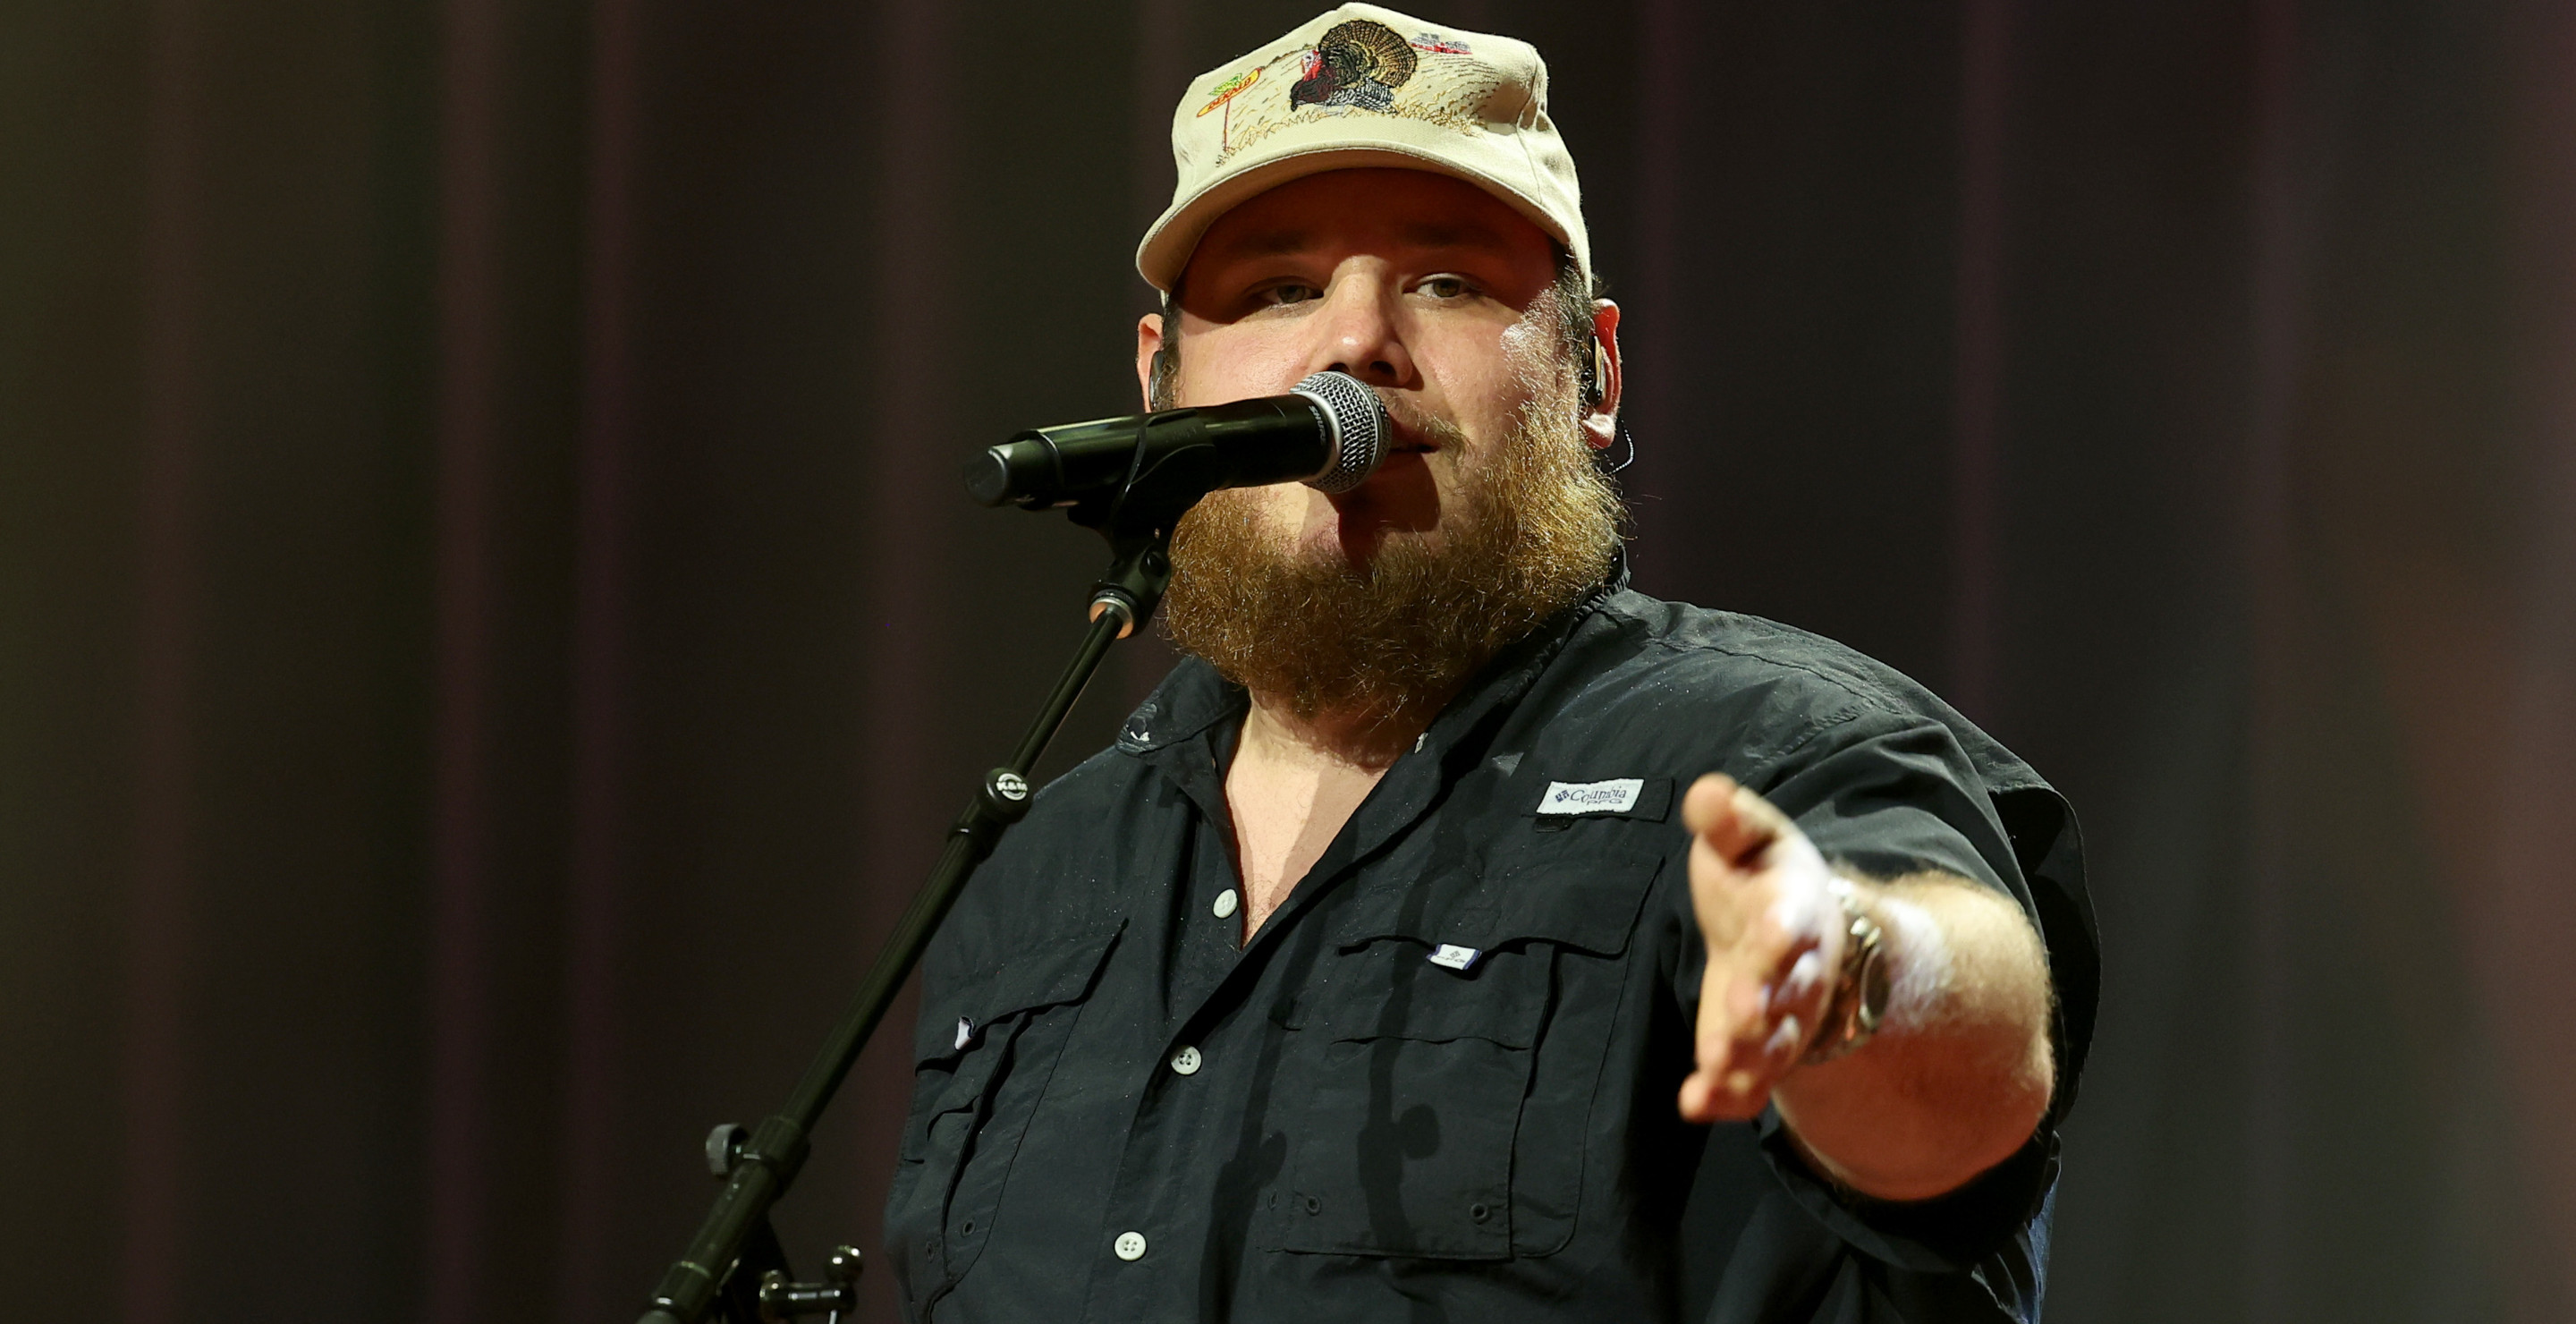 Luke Combs Wins ACM Award For Single Of The Year, But Fans Aren't Happy